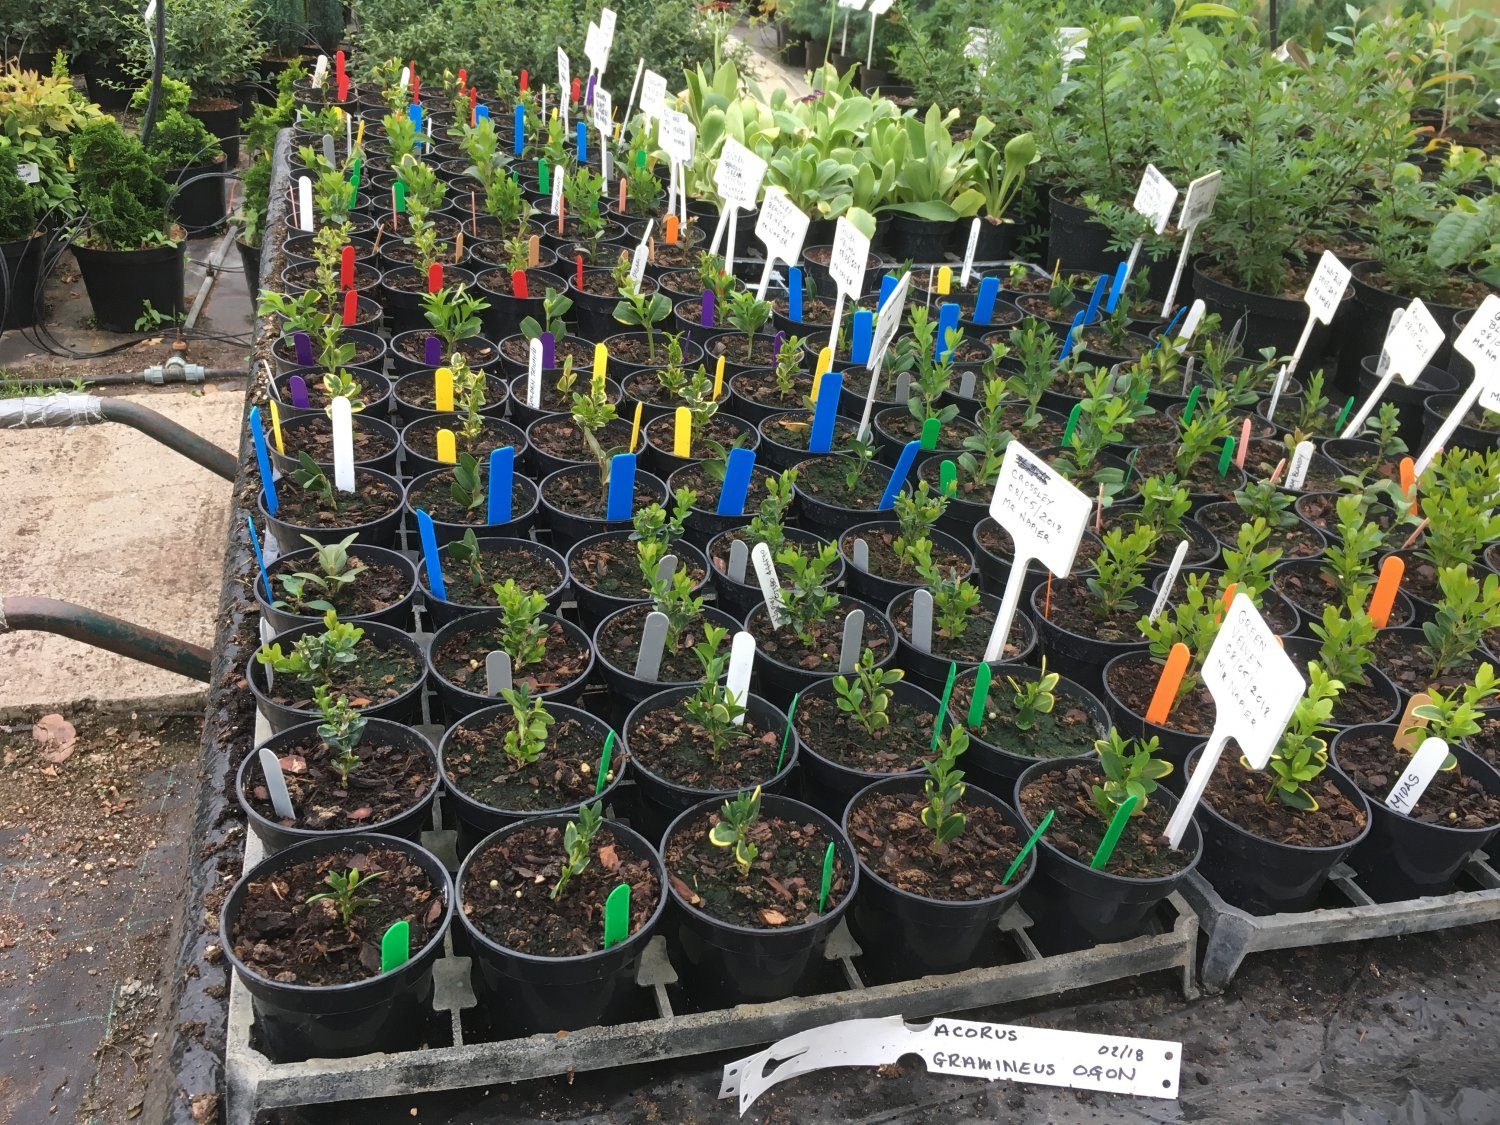 Cuttings from the Buxus Collection being propagated to increase security of rarer varieties at Shallowmead Nurseries, Lymington